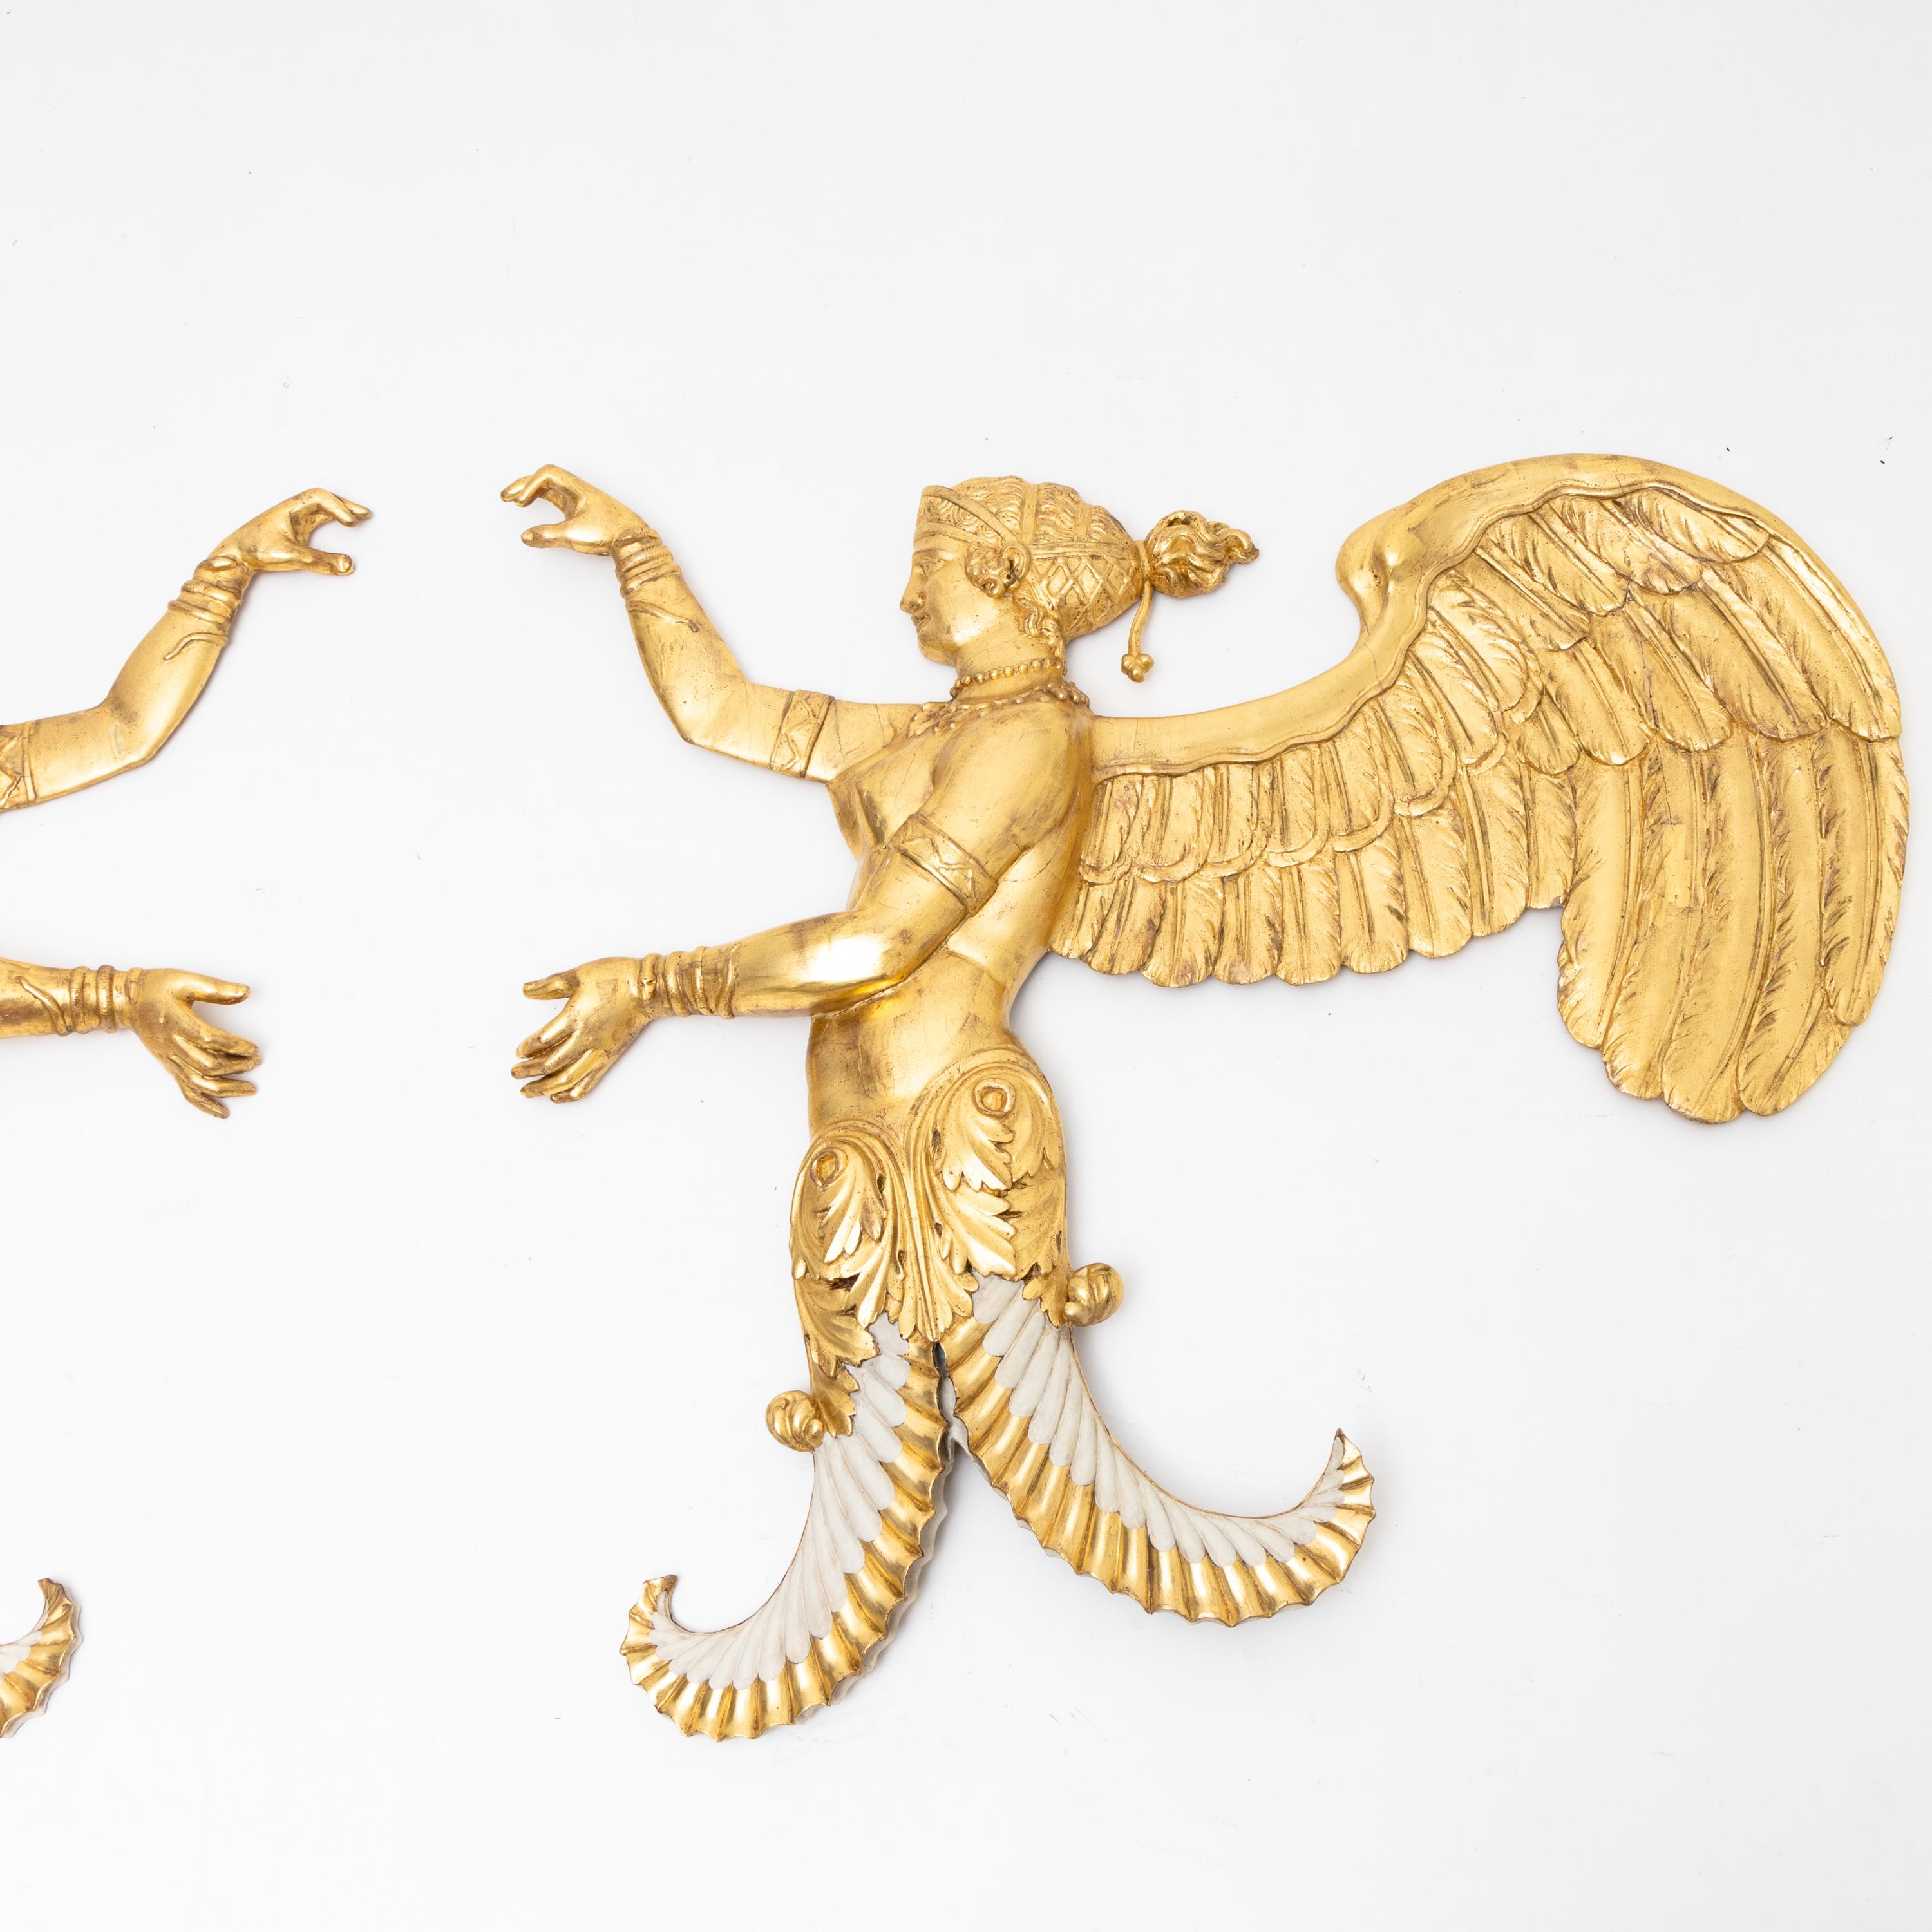 Italian Pair of Figurative Gilt Wall Reliefs, Italy, Early 19th Century